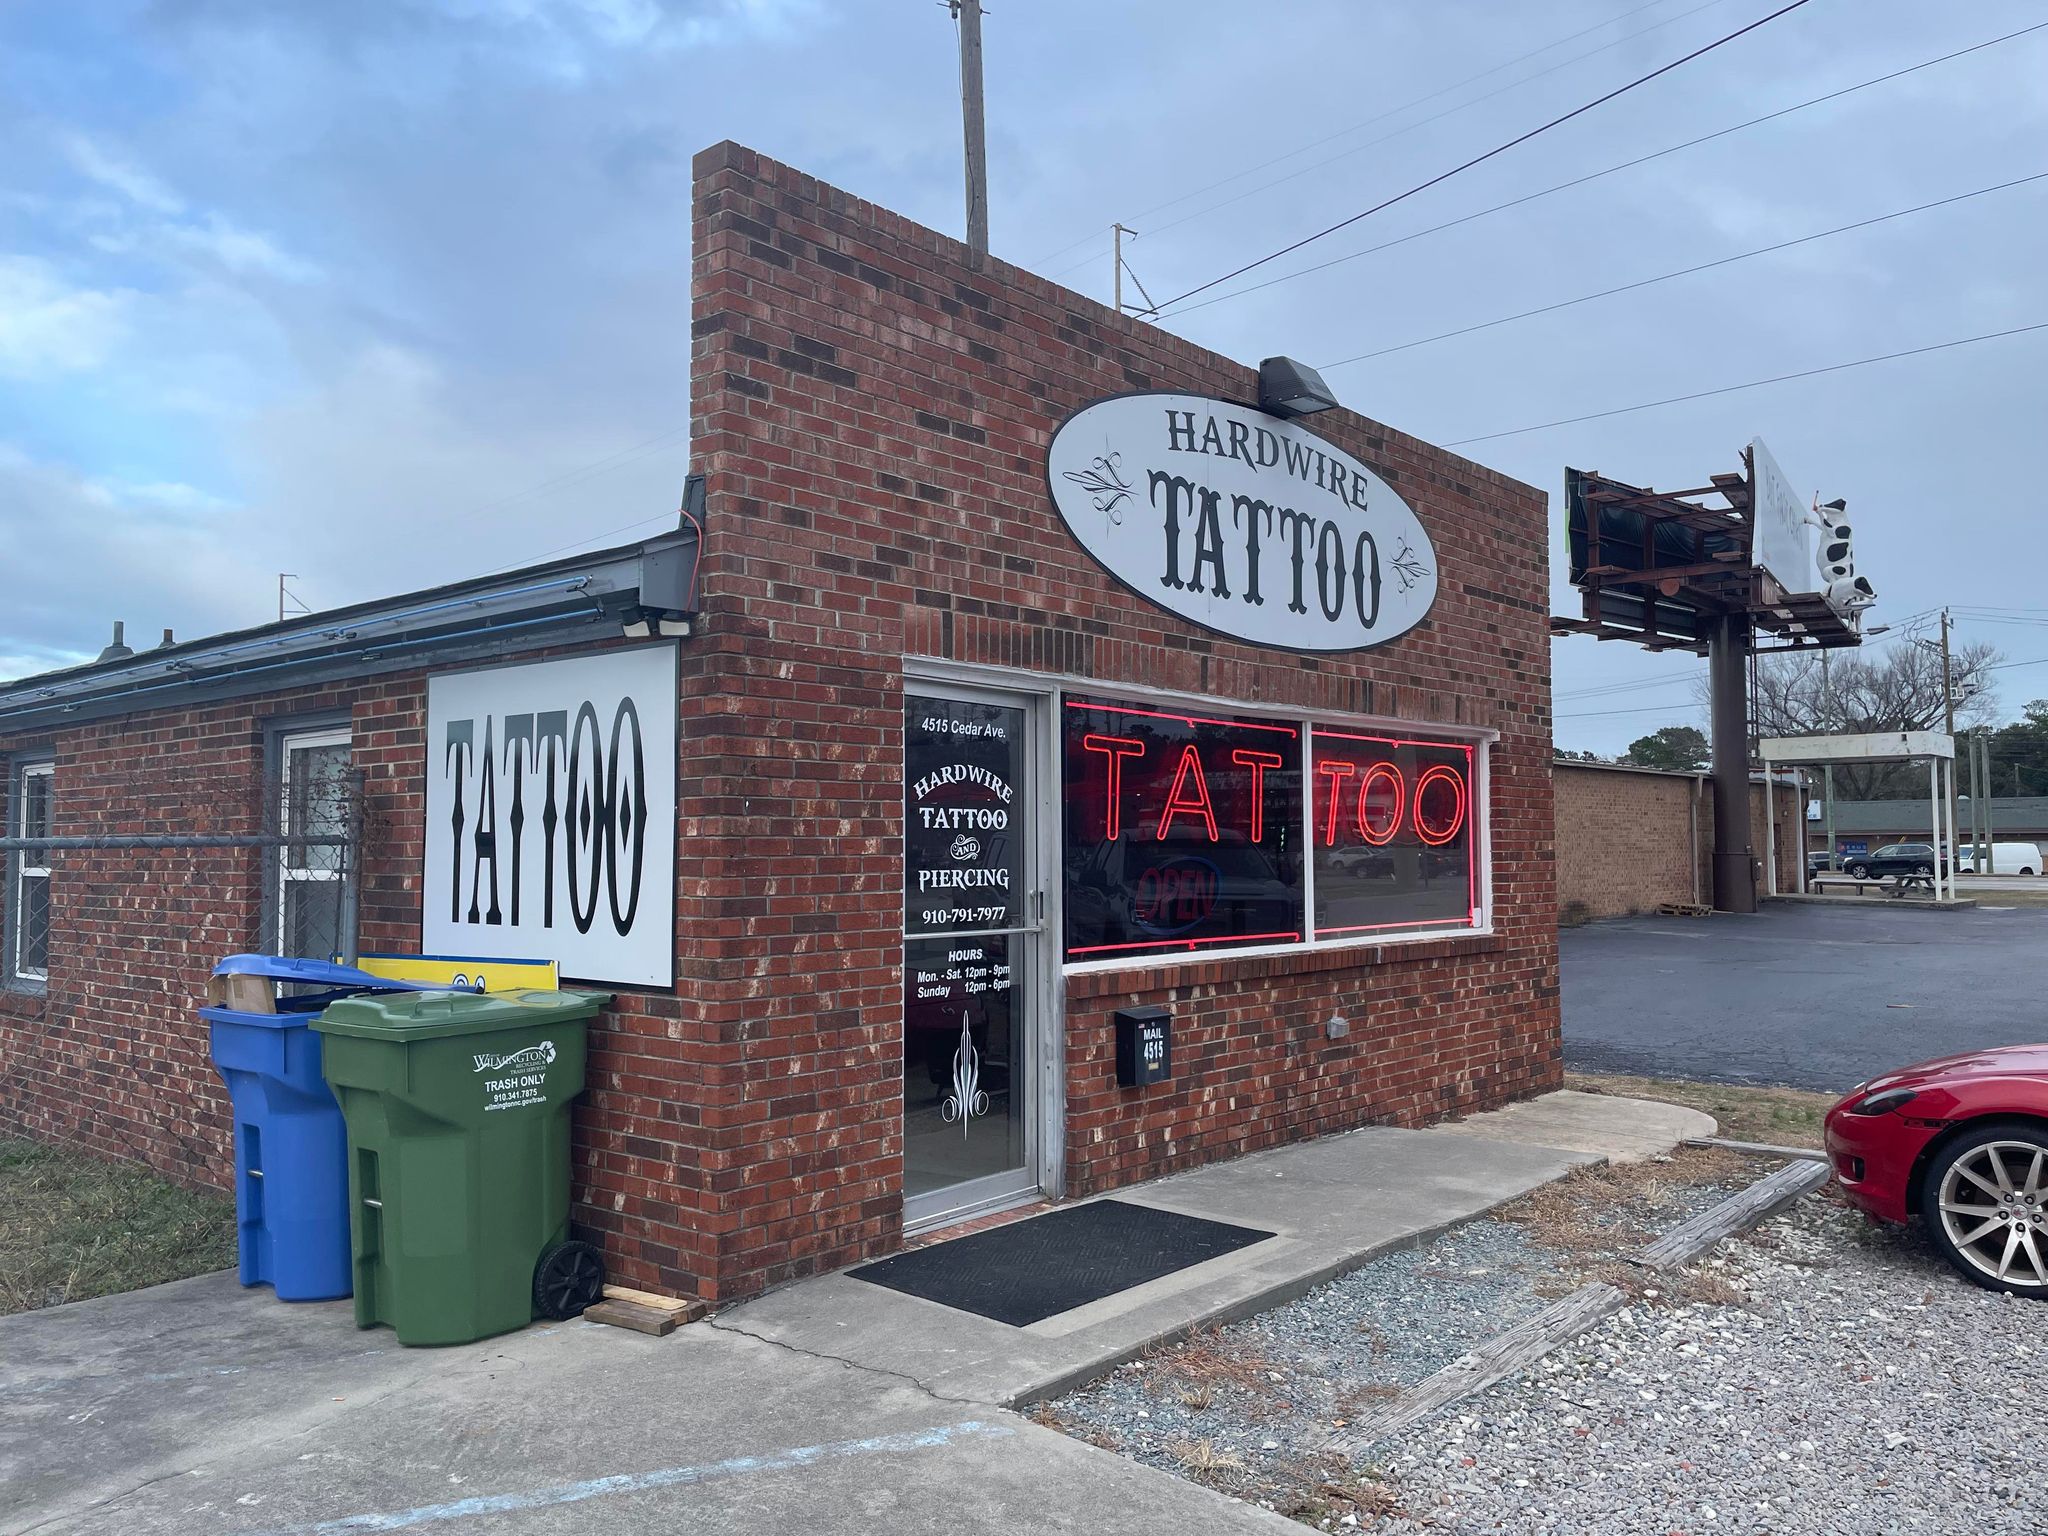 Art Fuel Inc 2165 Wrightsville Ave Wilmington NC Tattoos  Piercing   MapQuest